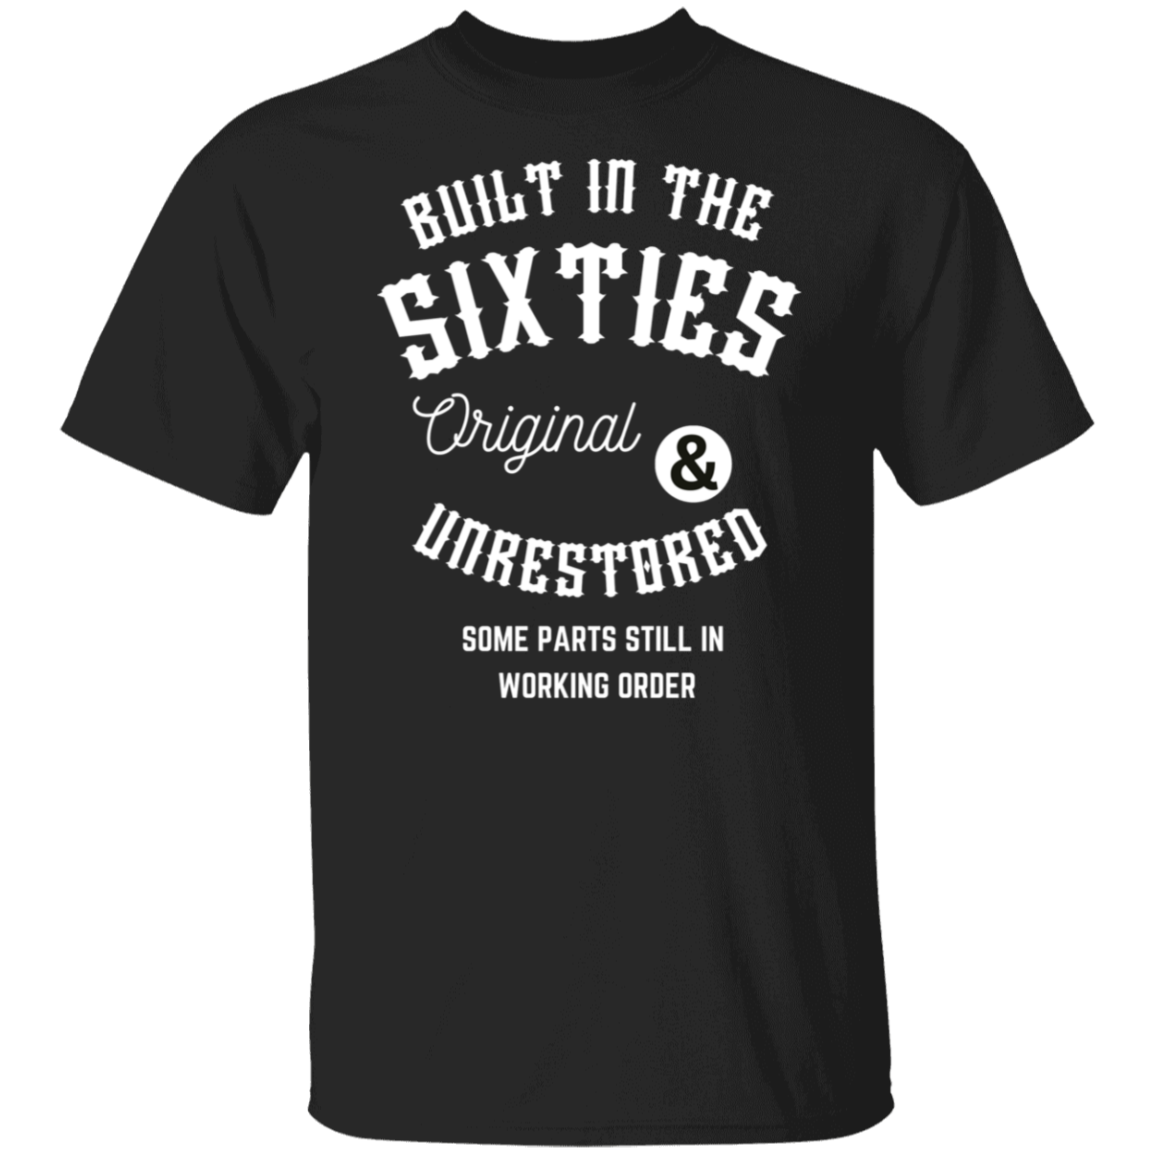 BUILT IN THE SIXITIES  5.3 oz. T-Shirt